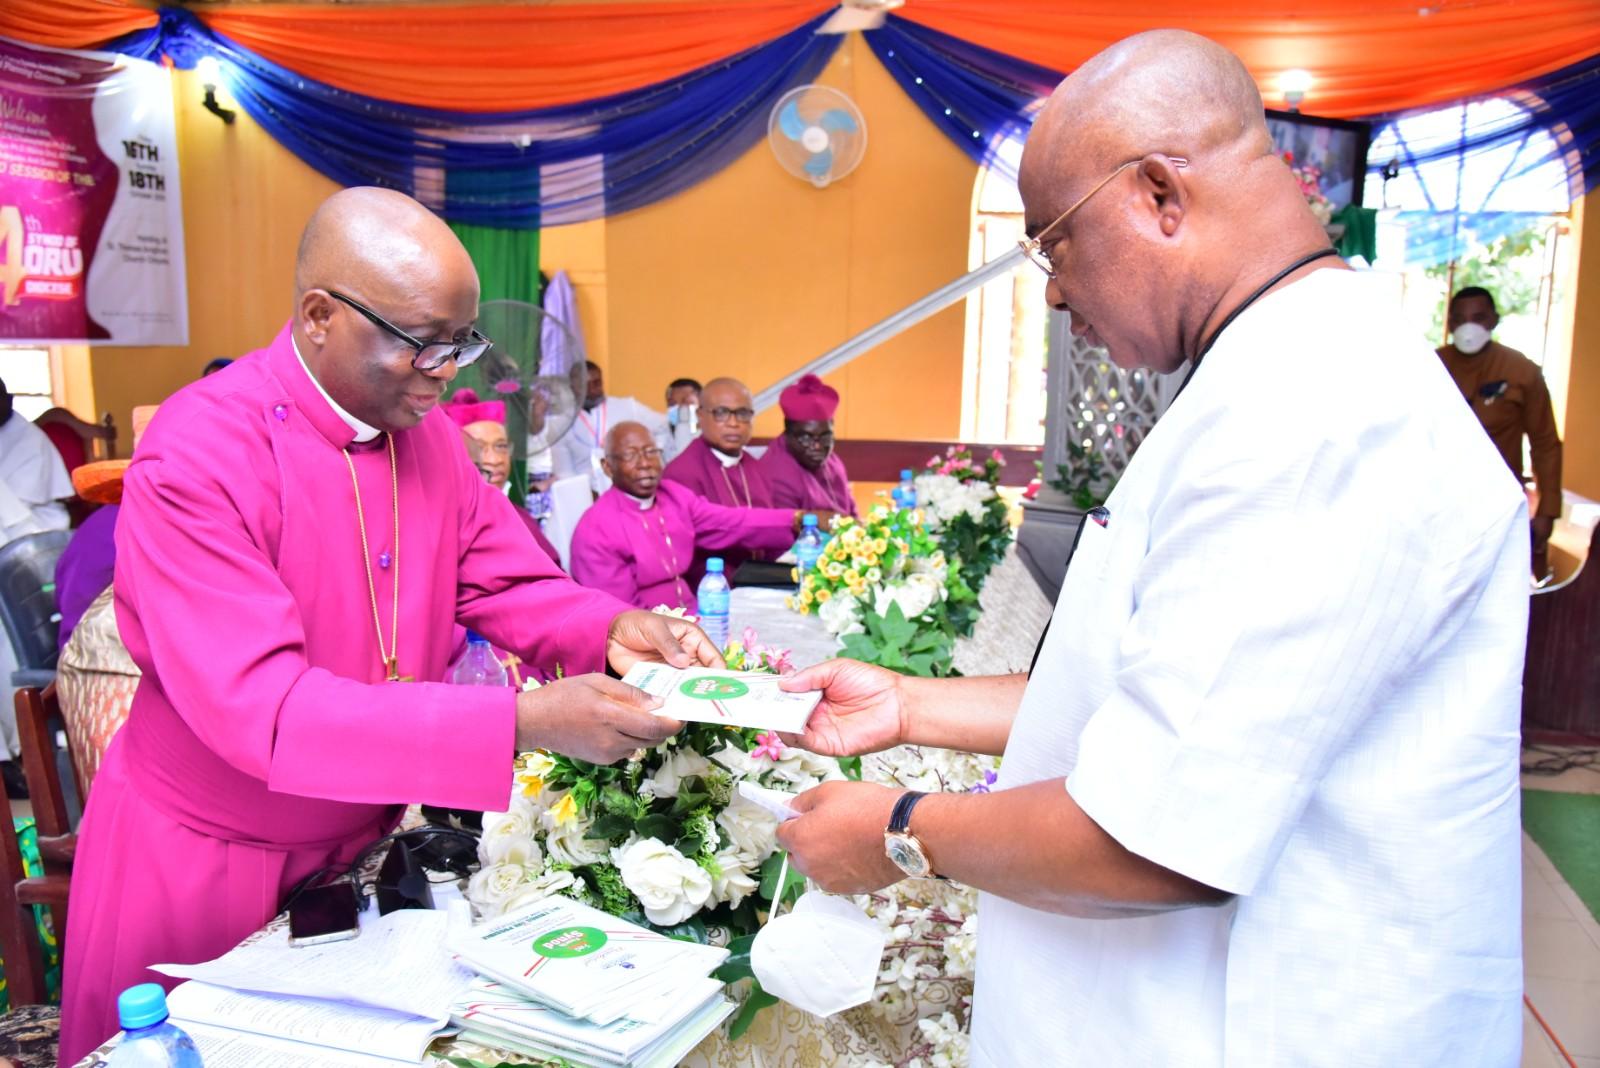 Governor Hope Uzodimma receiving a copy of the Presidential Address/Charge to the Synod from the Bishop of Oru Anglican Communion Rt. Rev. Geoffrey Chukwuneye when the Governor attended the Diocesan Synod held at St. Thomas Anglican Church, Omuma Oru-East LGA…weekend.